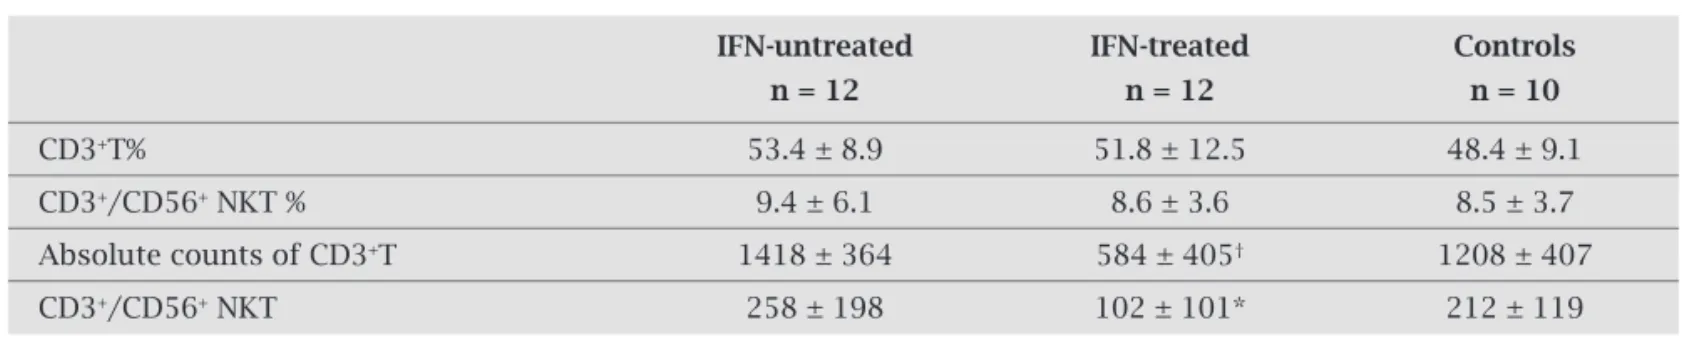 Table 4. CD3 + T cells and CD3 + /CD56 +  NKT in IFN-untreated, IFN-treated and controls